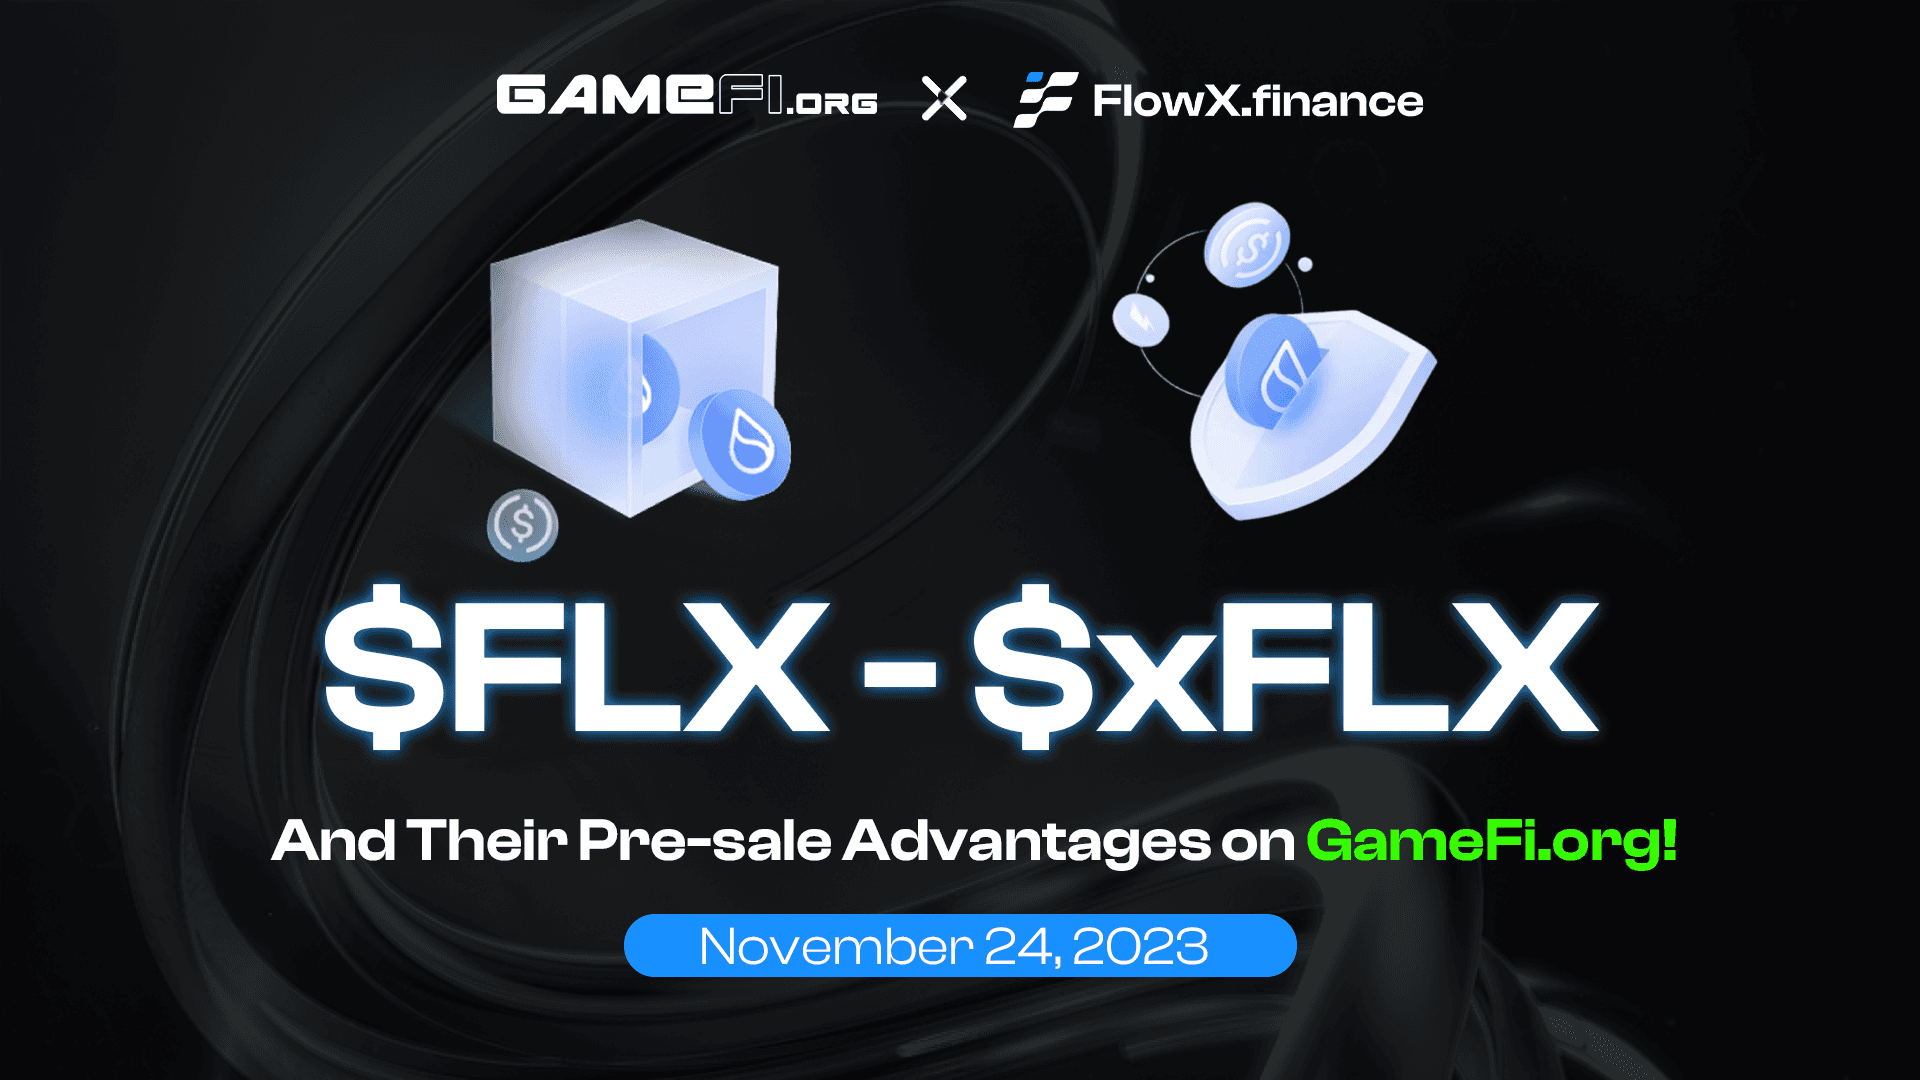 Converting $FLX, $xFLX, and Pre-sale Advantages on GameFi.org.